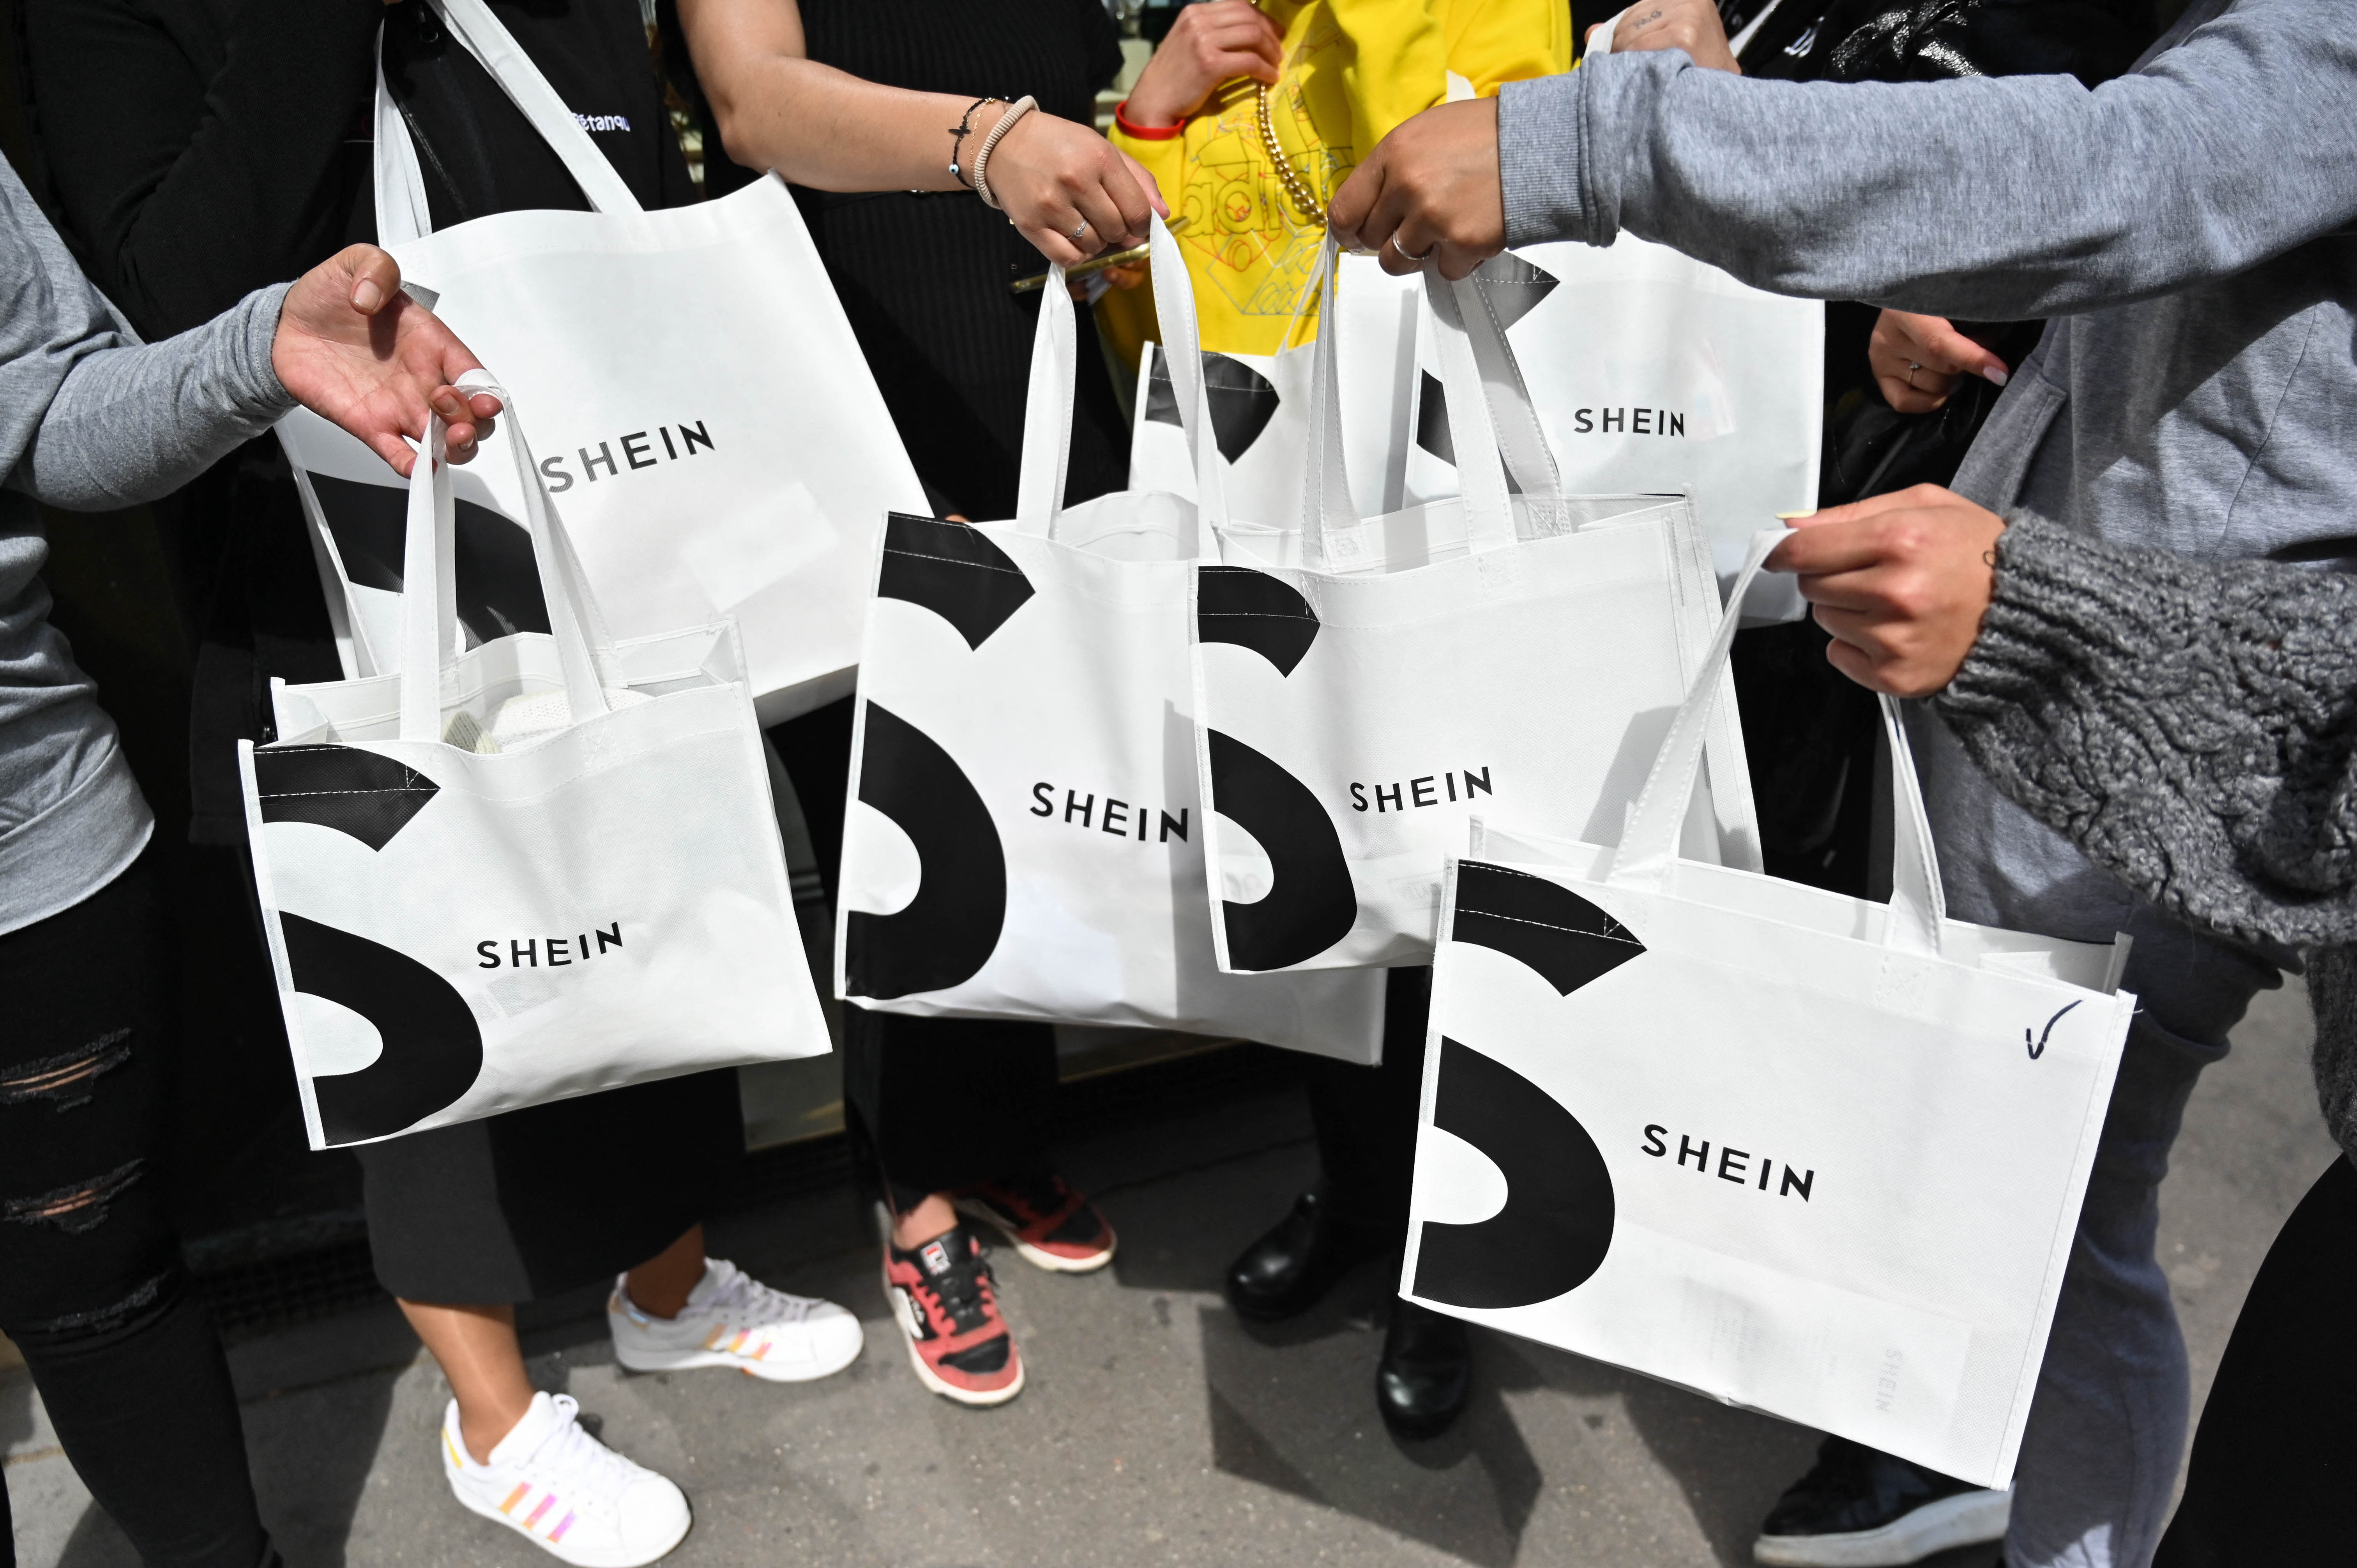 Shopping Shein? What to know about the fast-fashion brand's so